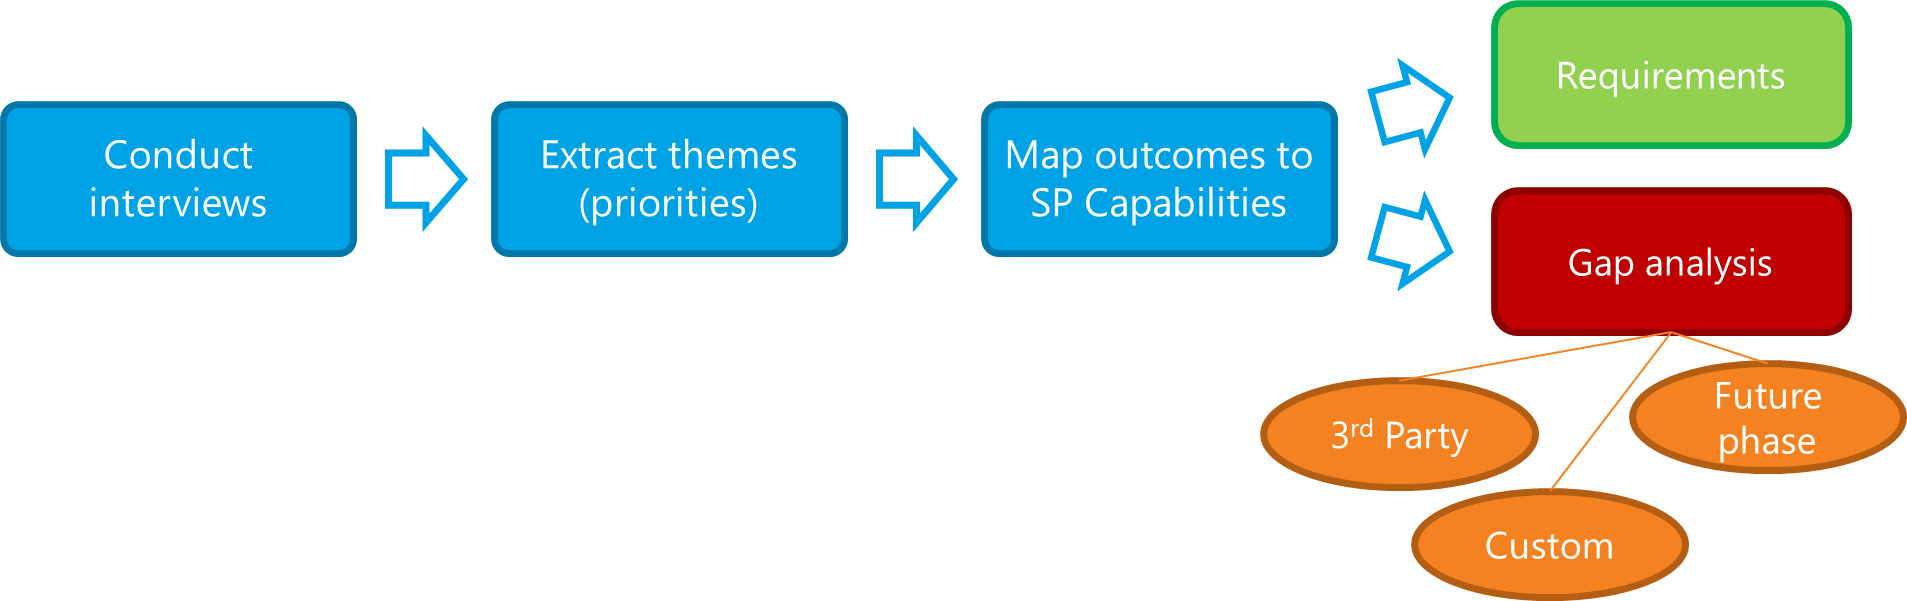 Conduct interviews > Extract themes (priorities) > Map outcomes to SP capabilities > Requirements > Gap analysis > 3rd Party, Customer, Future phase